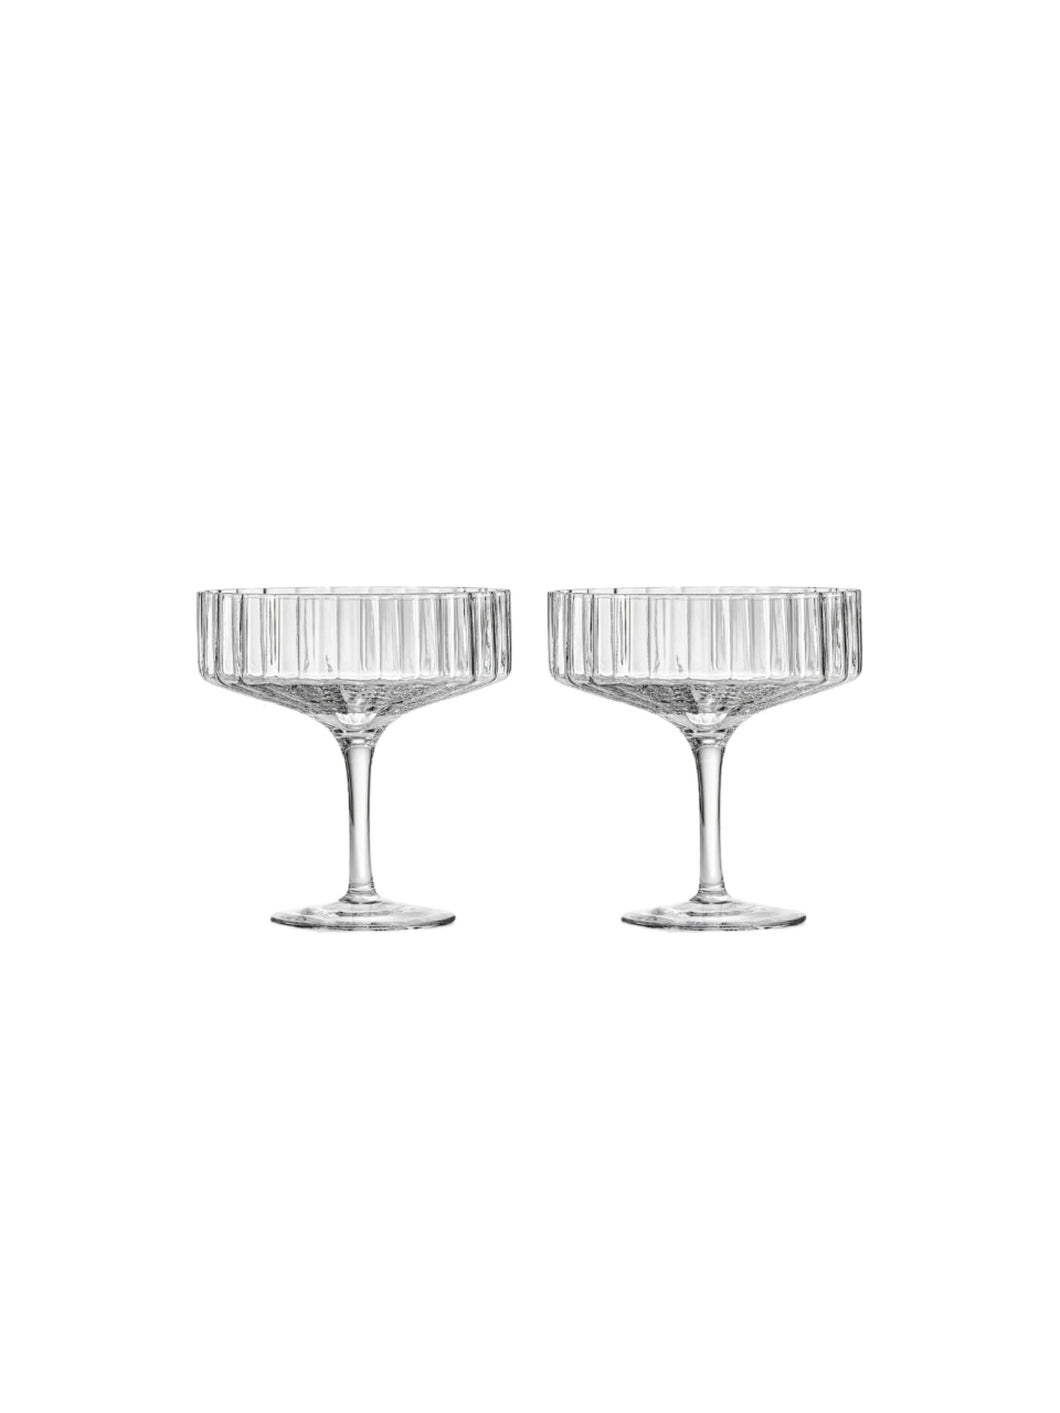 MODERNISM | Cullinan Fluted Crystal Champagne Coupe Glasses